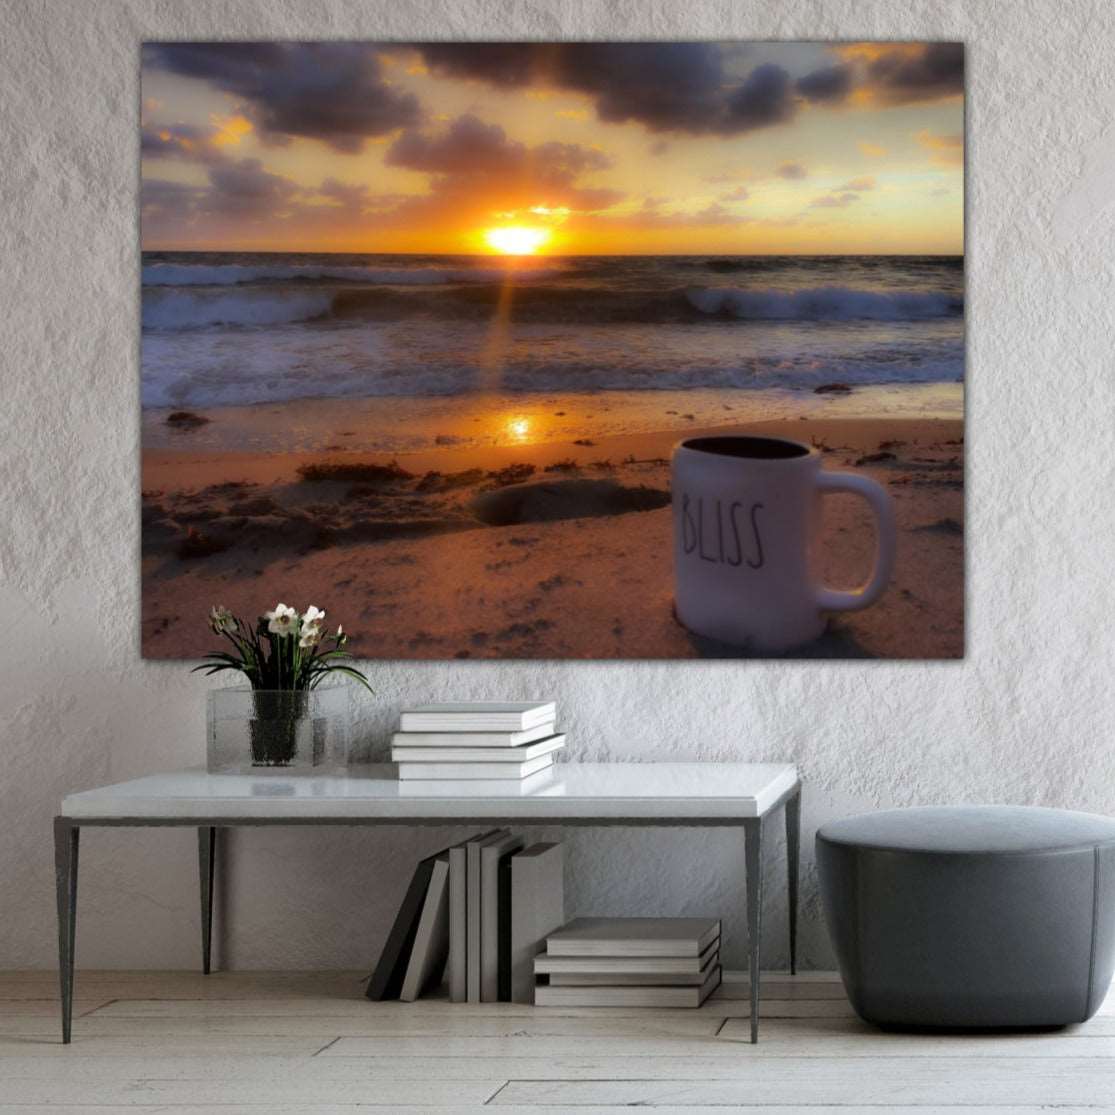 a blissful morning acrylic print home office decor by Jacqueline mb designs 